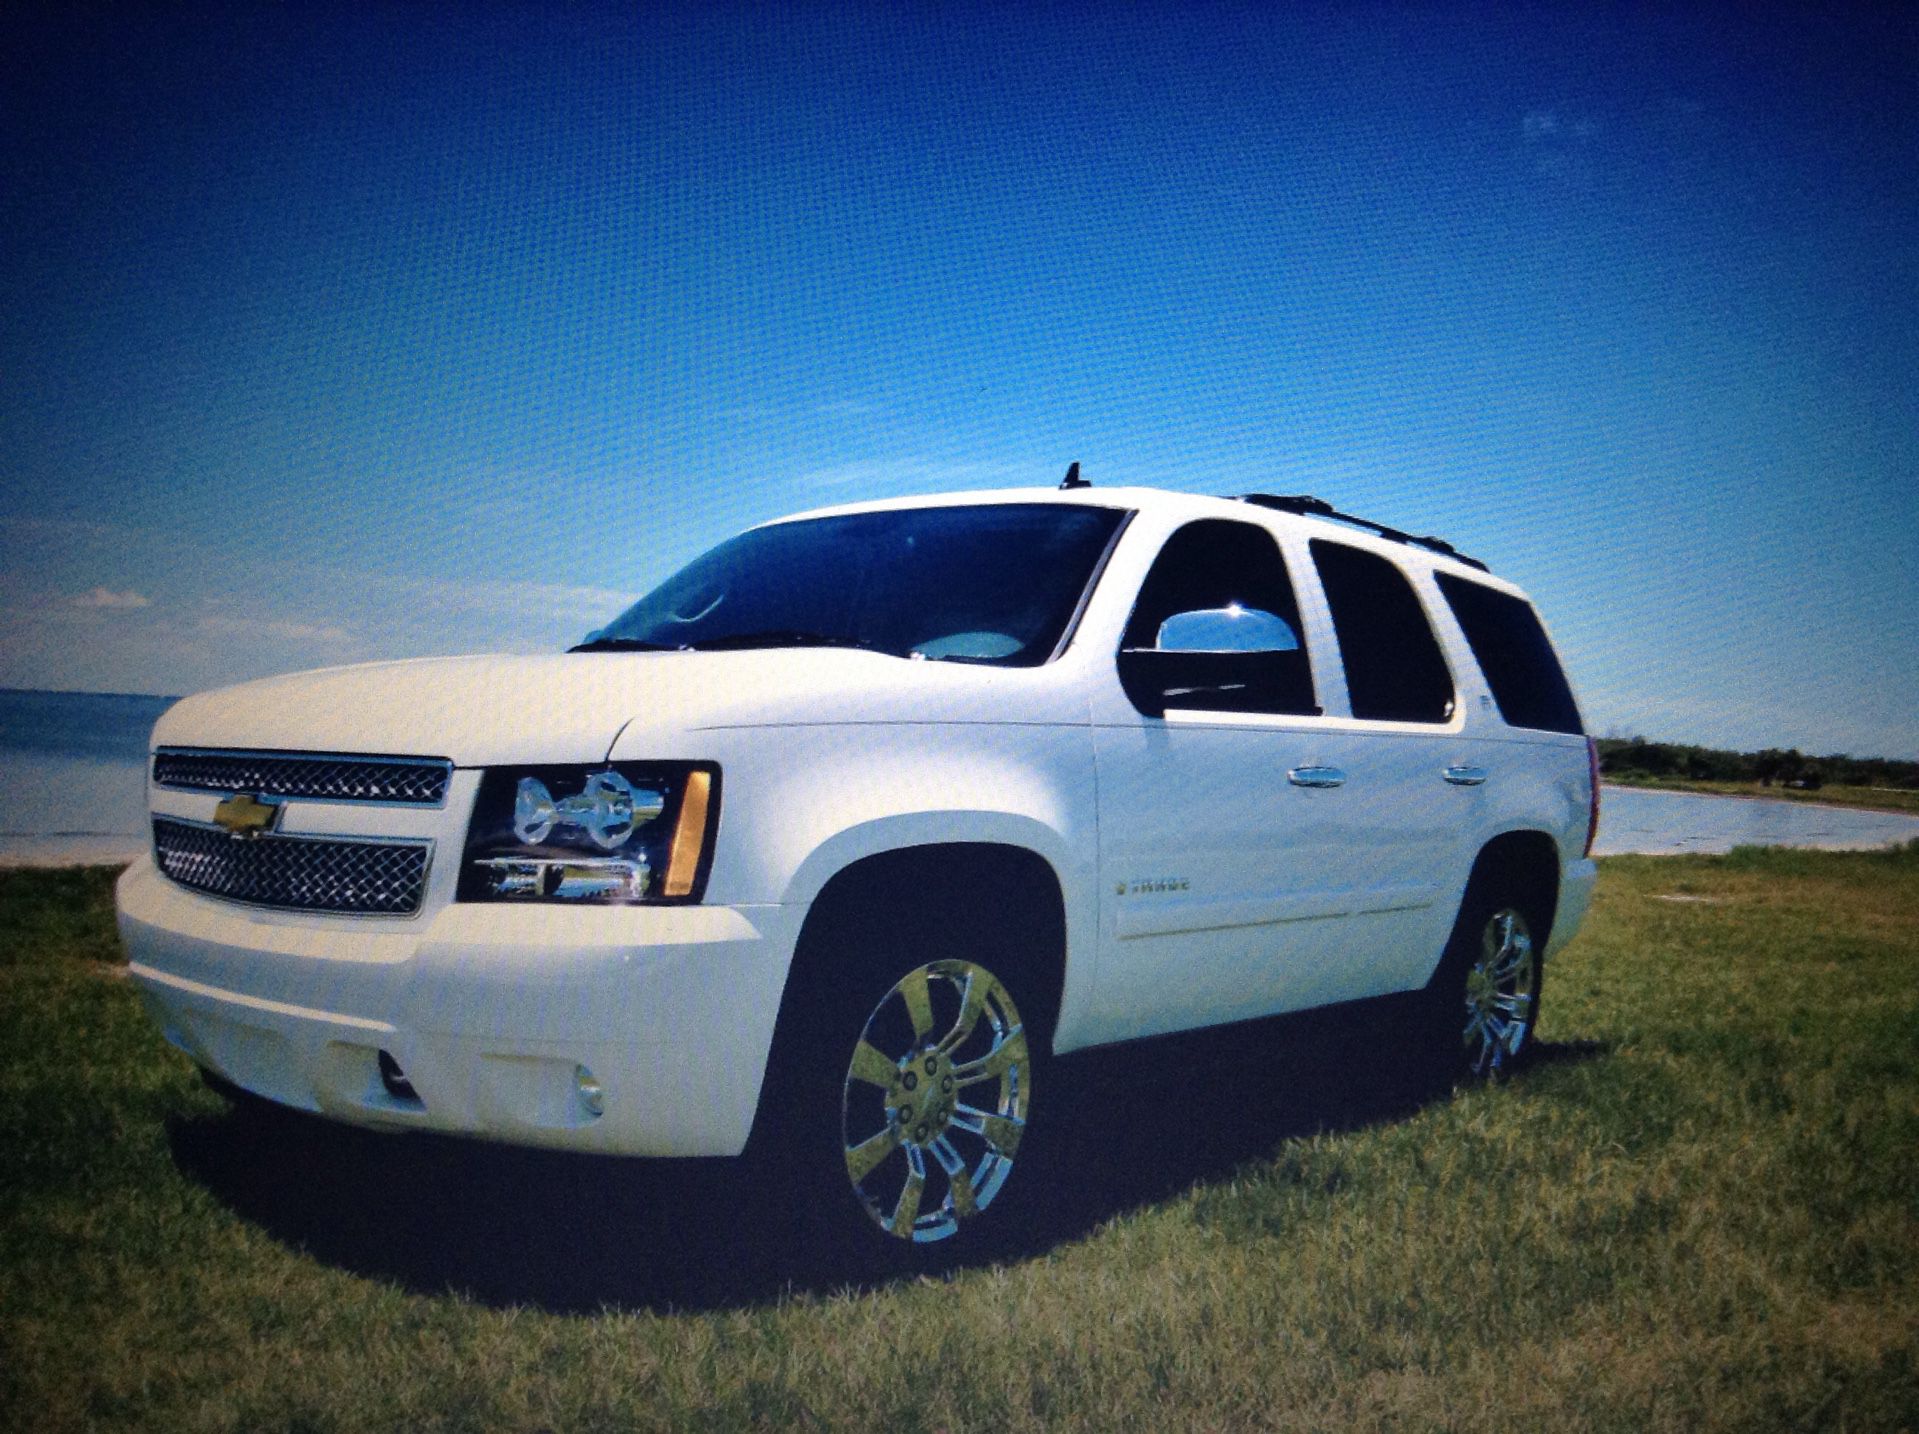 I'm Selling Chevrolet Tahoe 2007 97 K miles Beautiful int and Ext! ➥ Pat77taylor @ G m a i l . C o m // Now I'm unable to send messages!